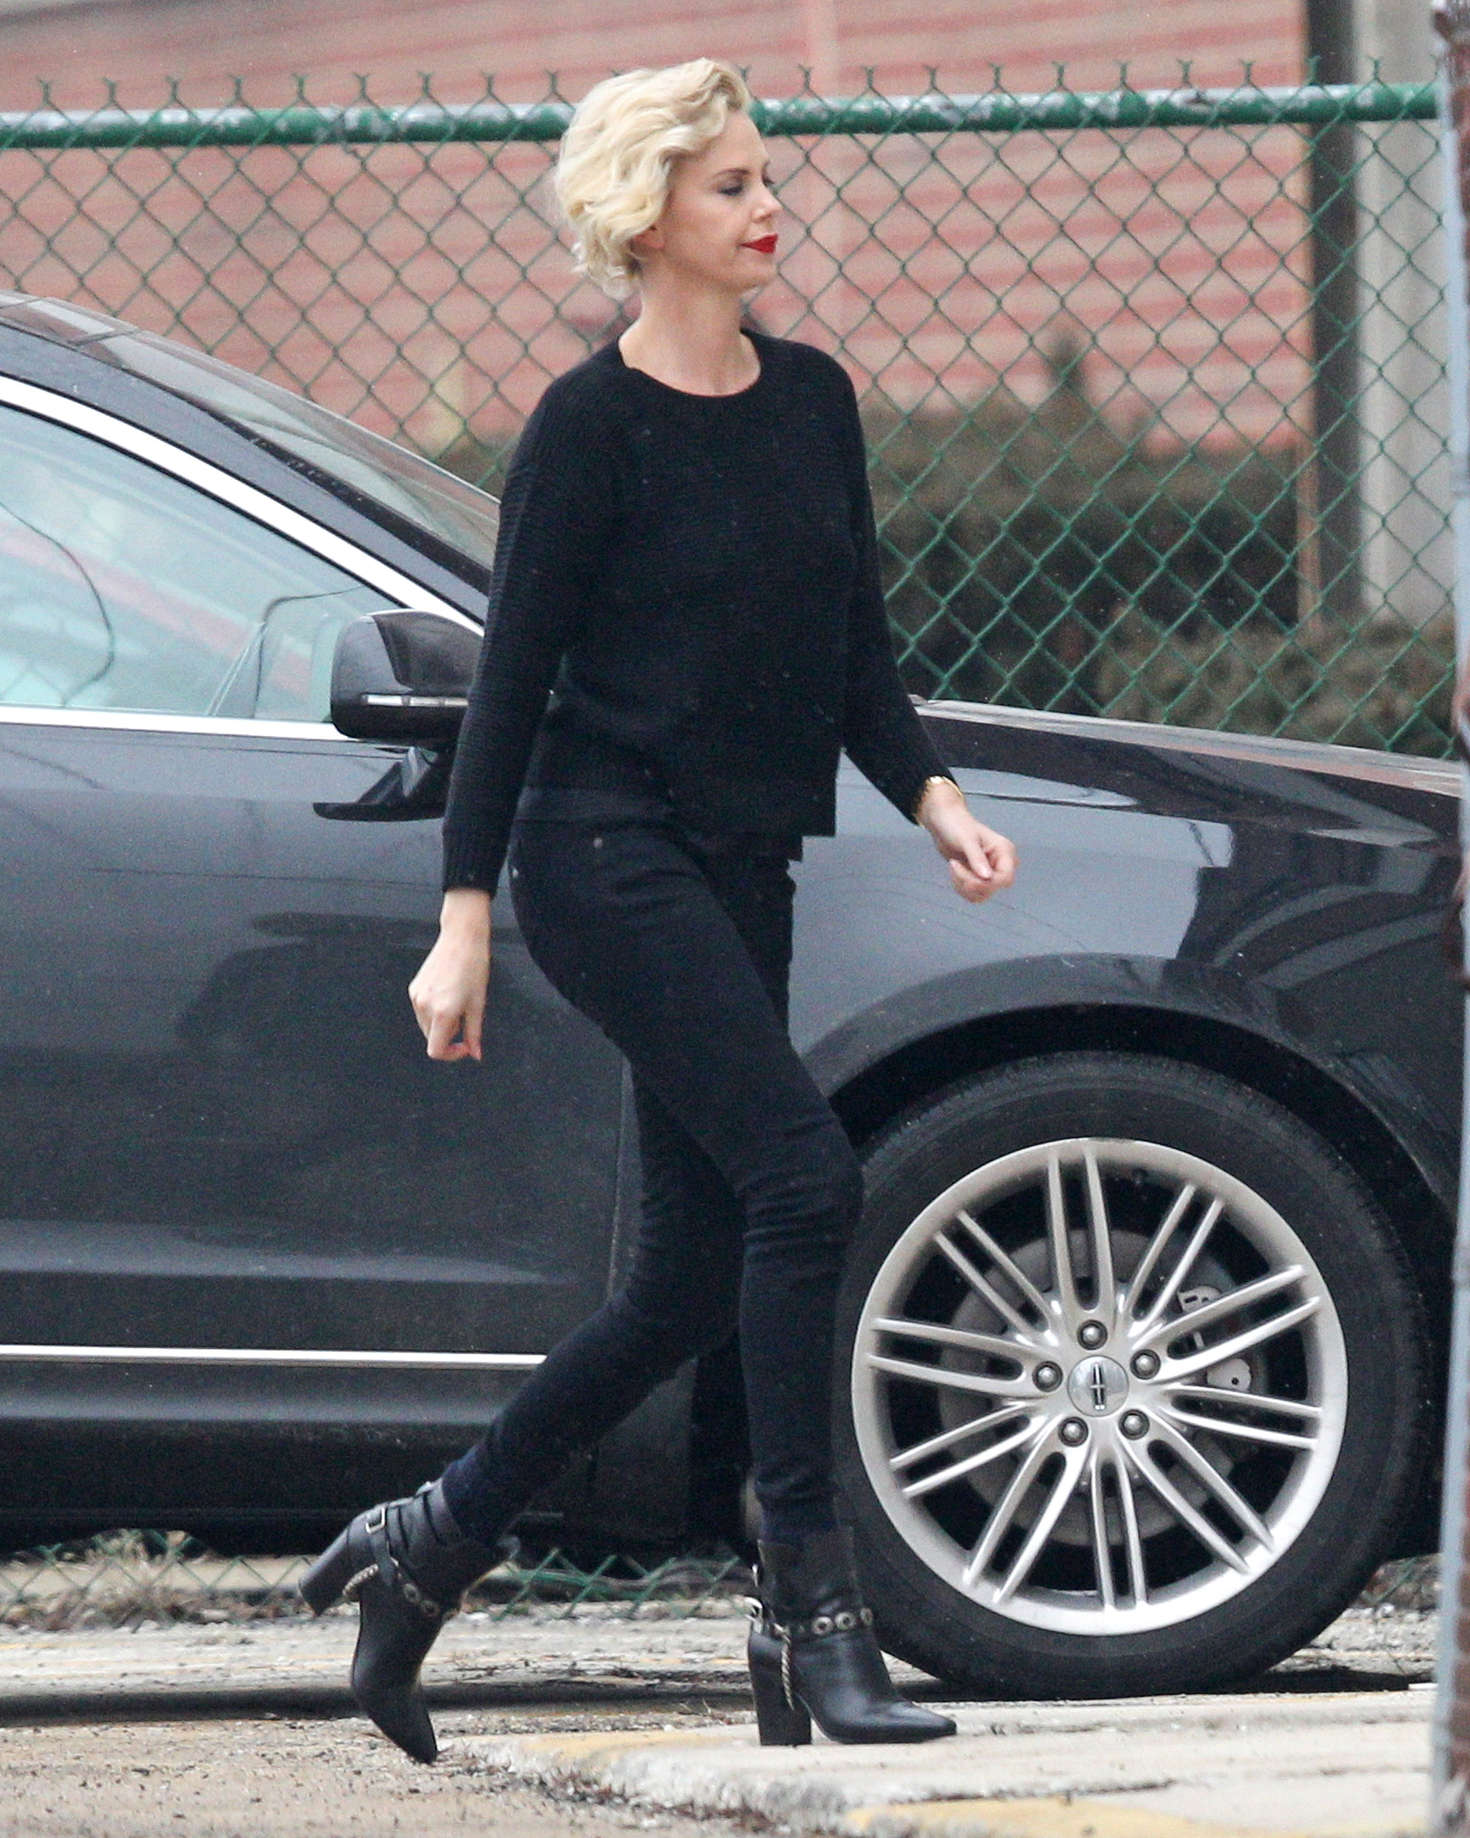 Charlize Theron on the set of â€˜The Nash Edgerton Projectâ€™ in Chicago